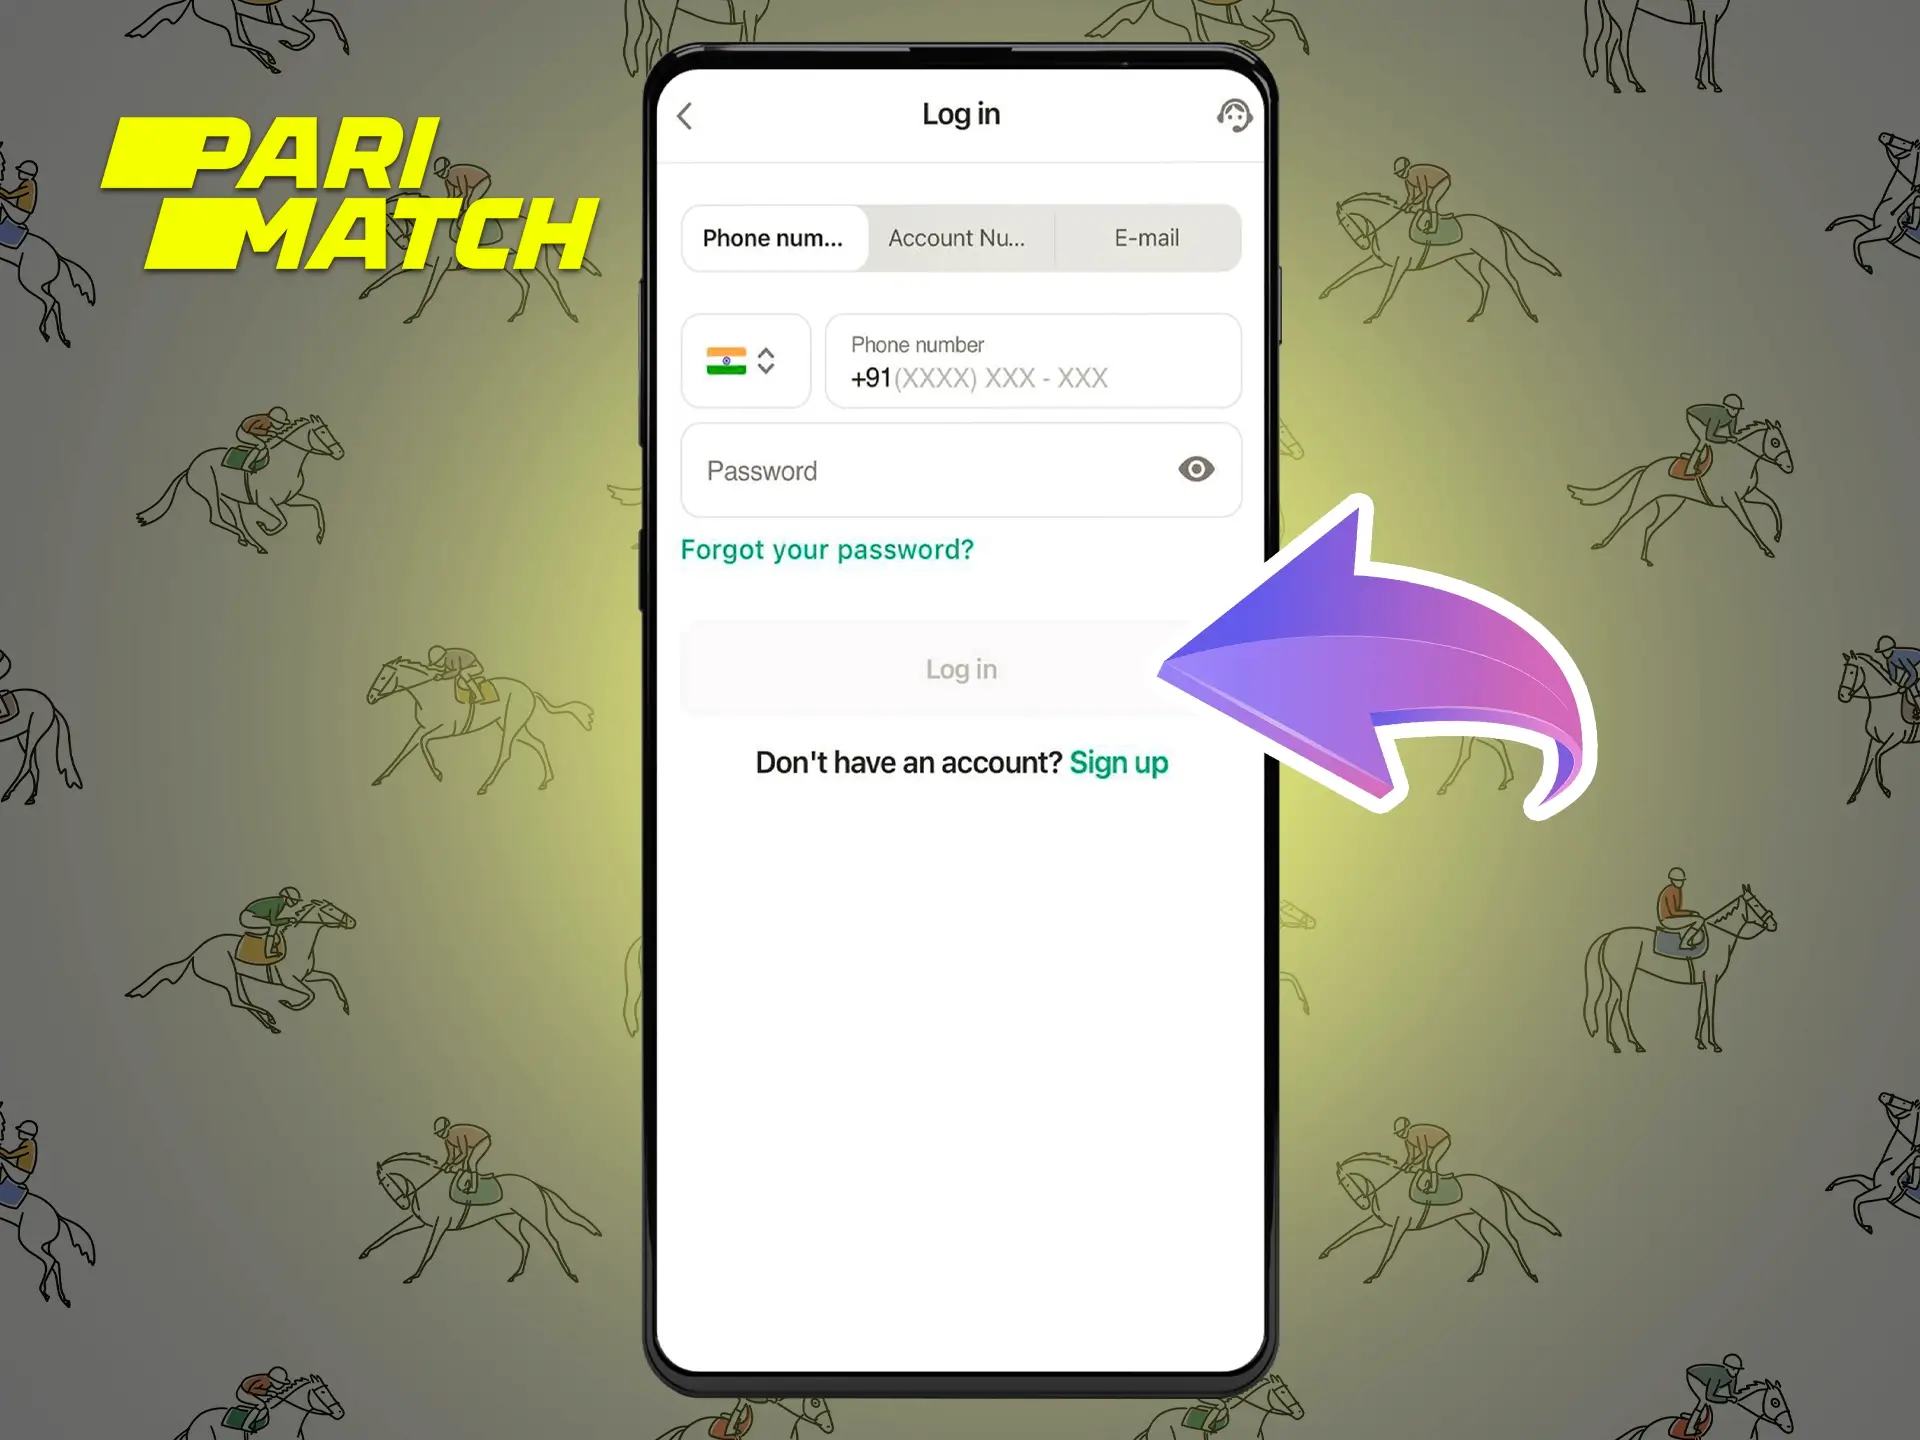 Open the official Parimatch India website and log in to your personal account using your phone number.